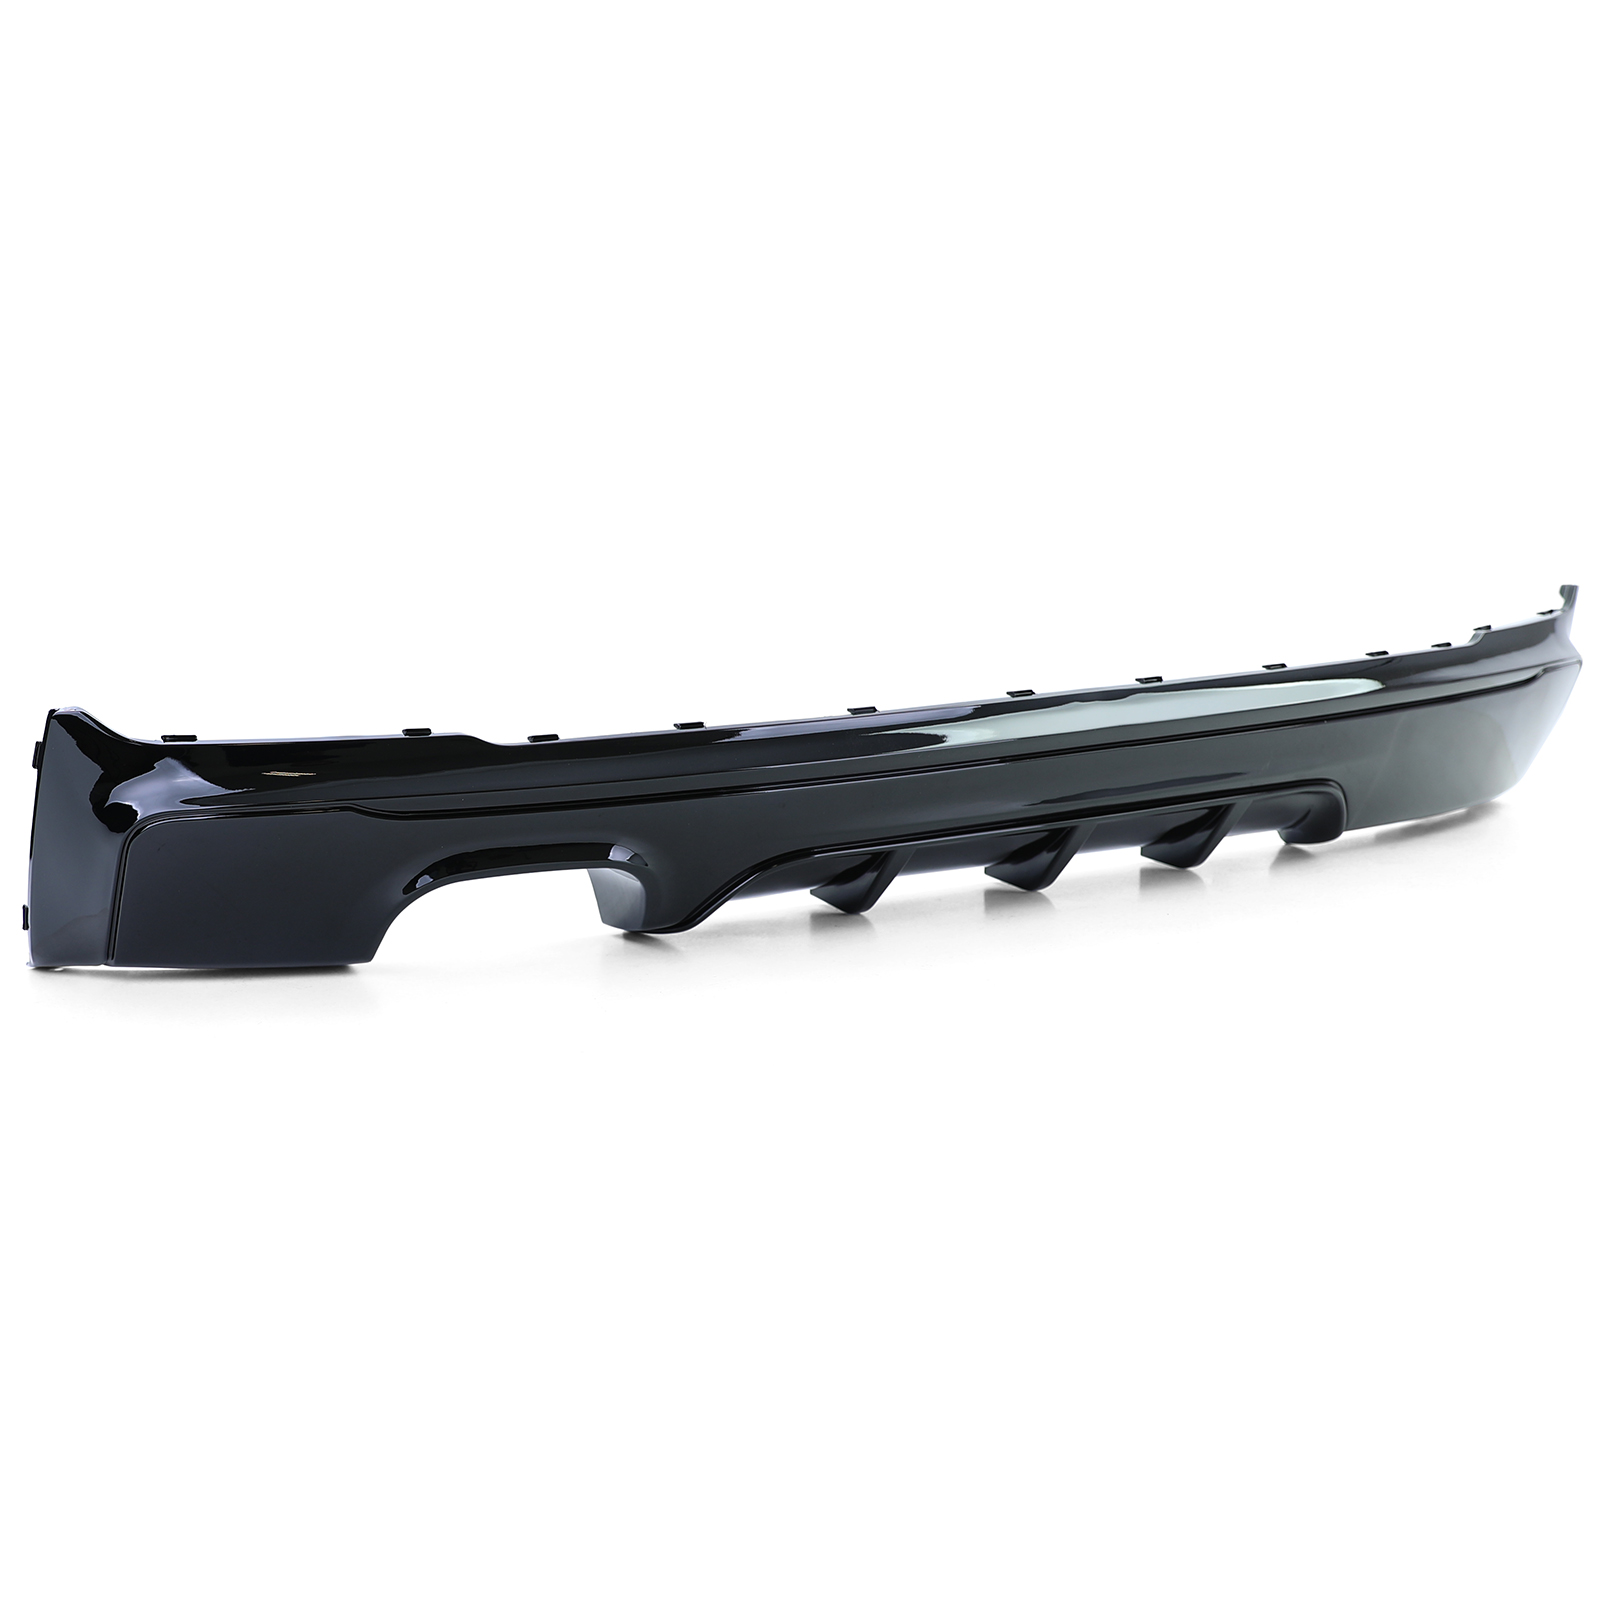 BMW 2 series F22 F23 rear diffuser double left exit - shiny mperf